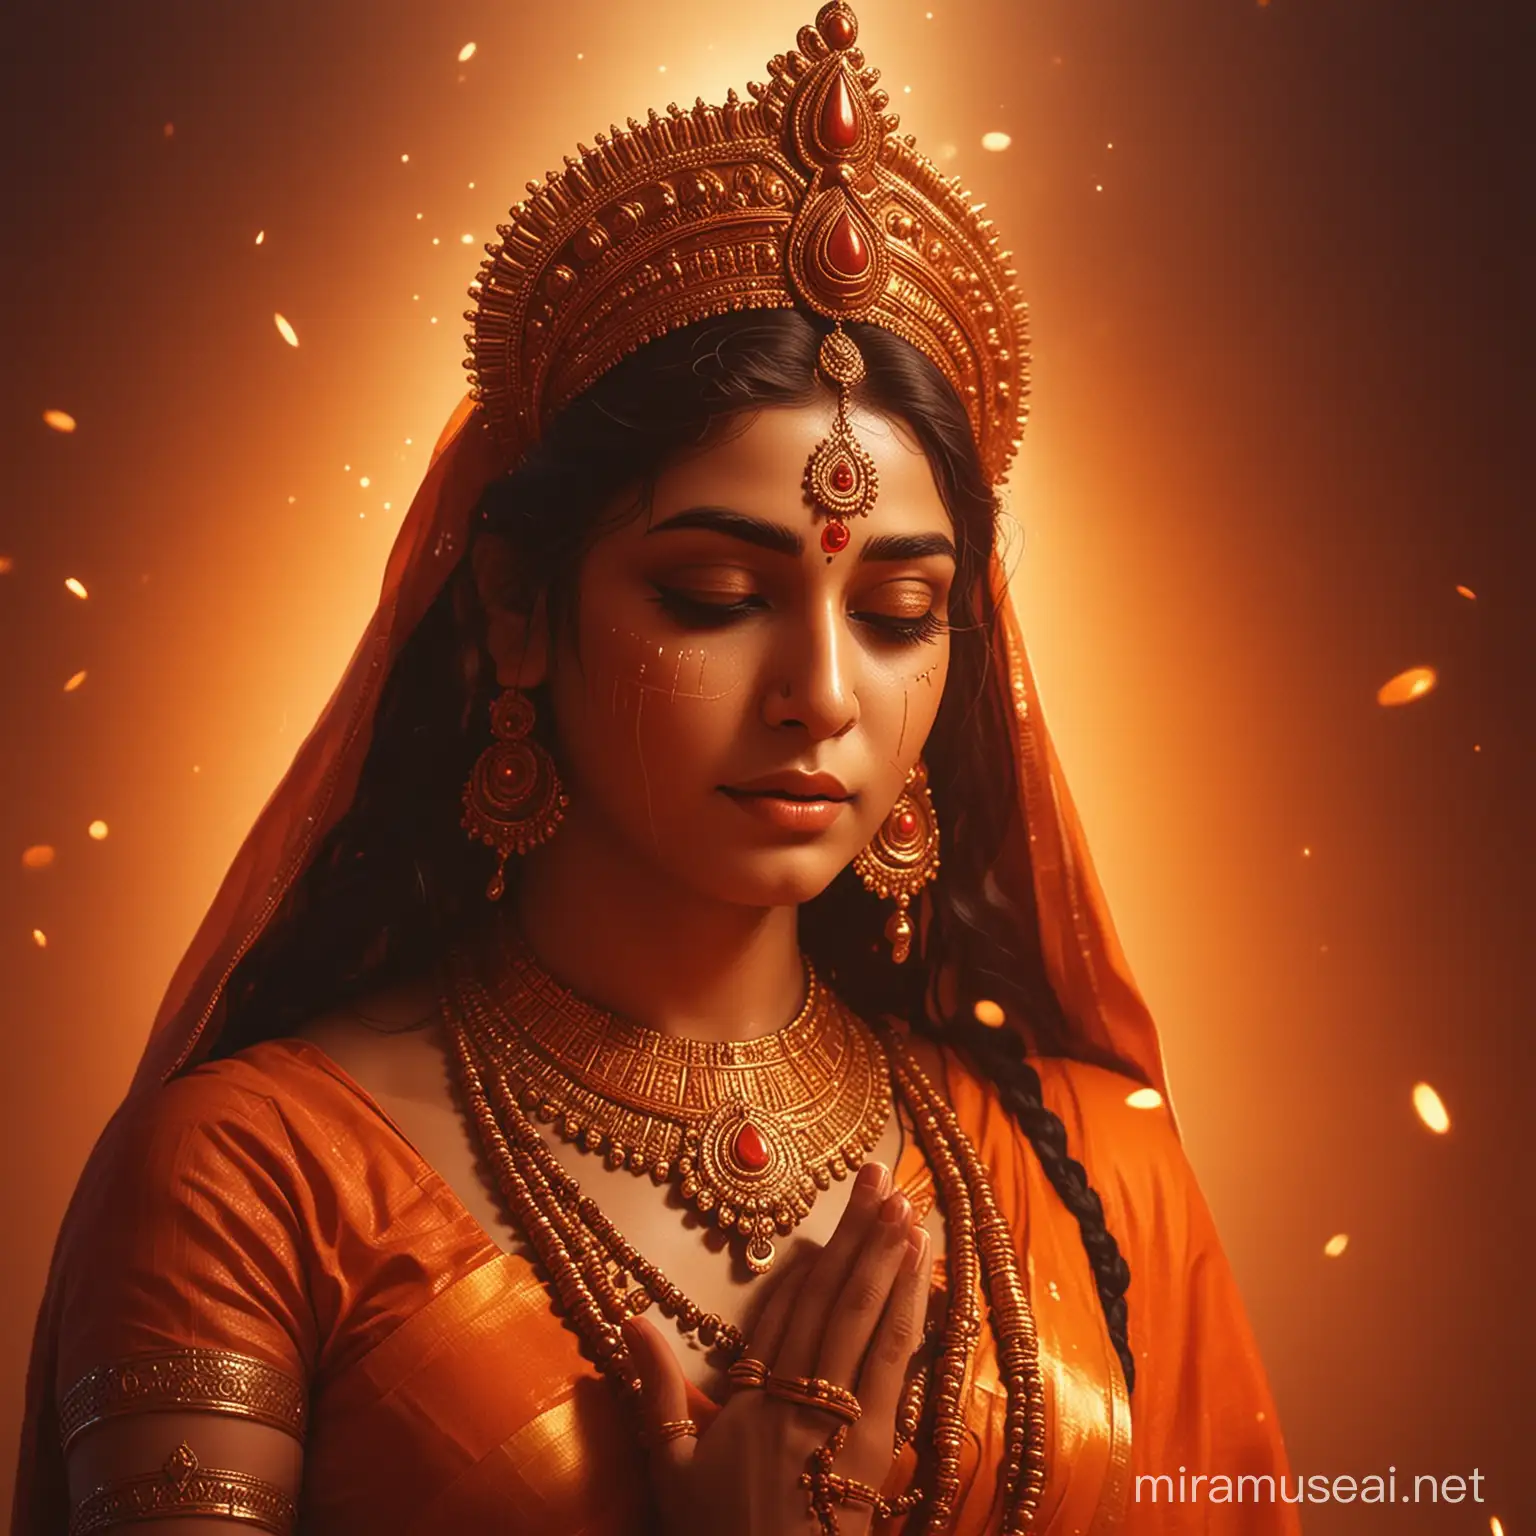 Durga Mata Blessing a sad men, 
Dugra Maa Blessing to give, Cinematic Look, Background Orange Light Source, Theme Artwork,